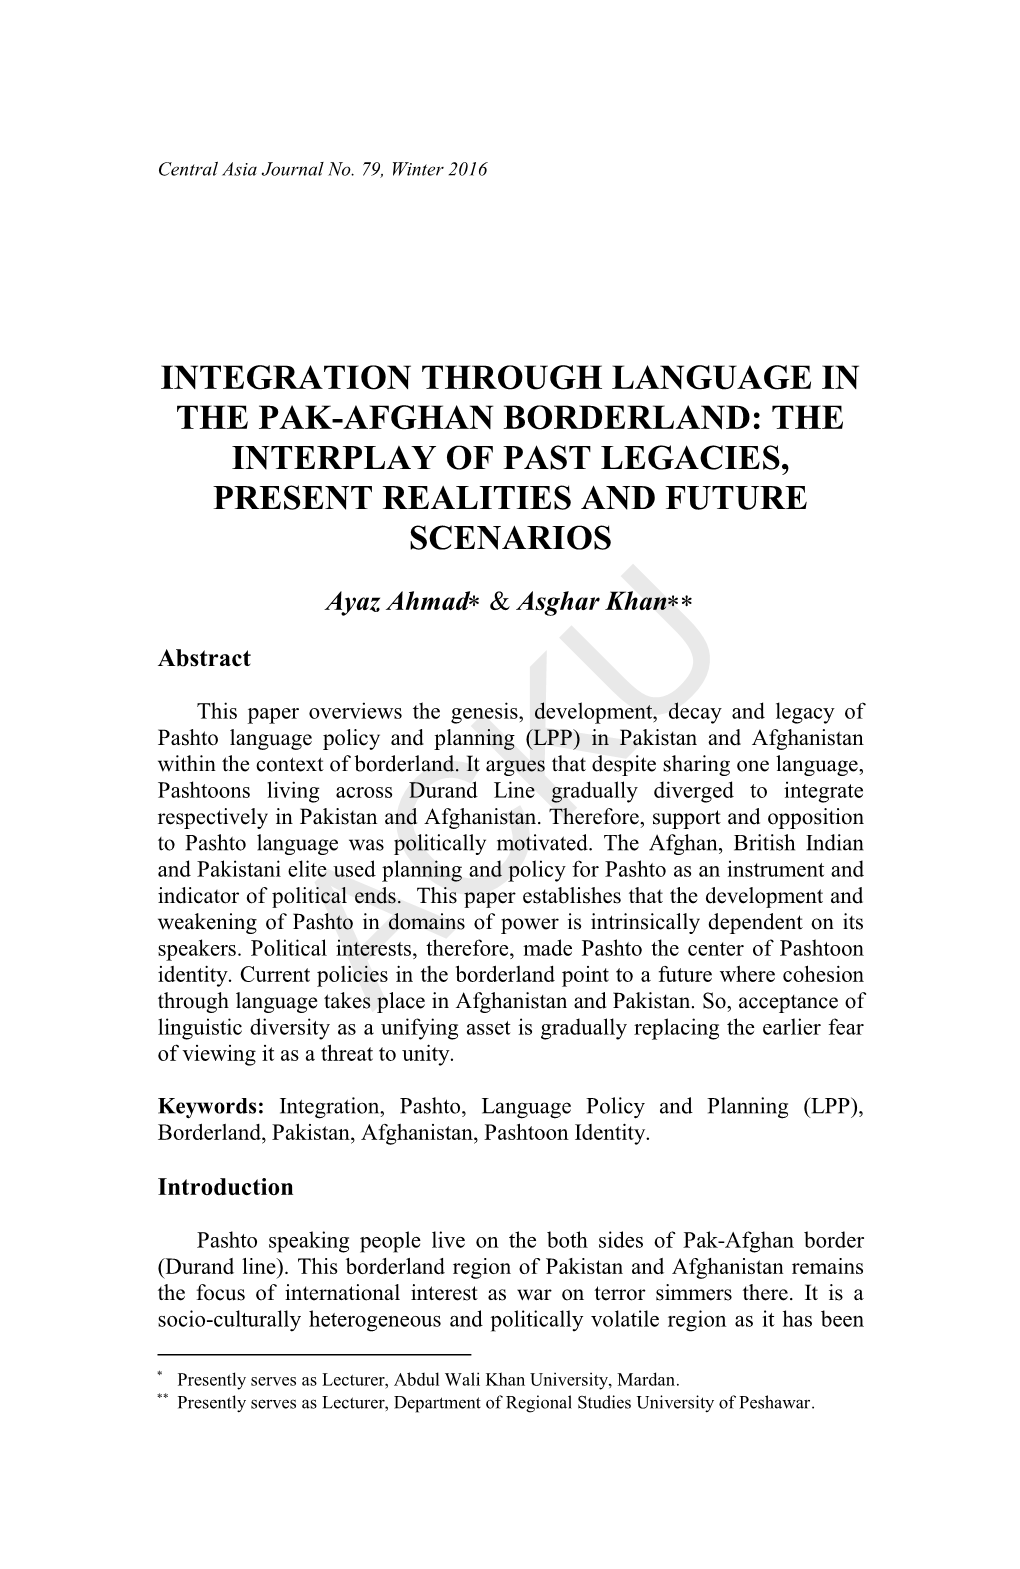 Integration Through Language in the Pak-Afghan Borderland: the Interplay of Past Legacies, Present Realities and Future Scenarios